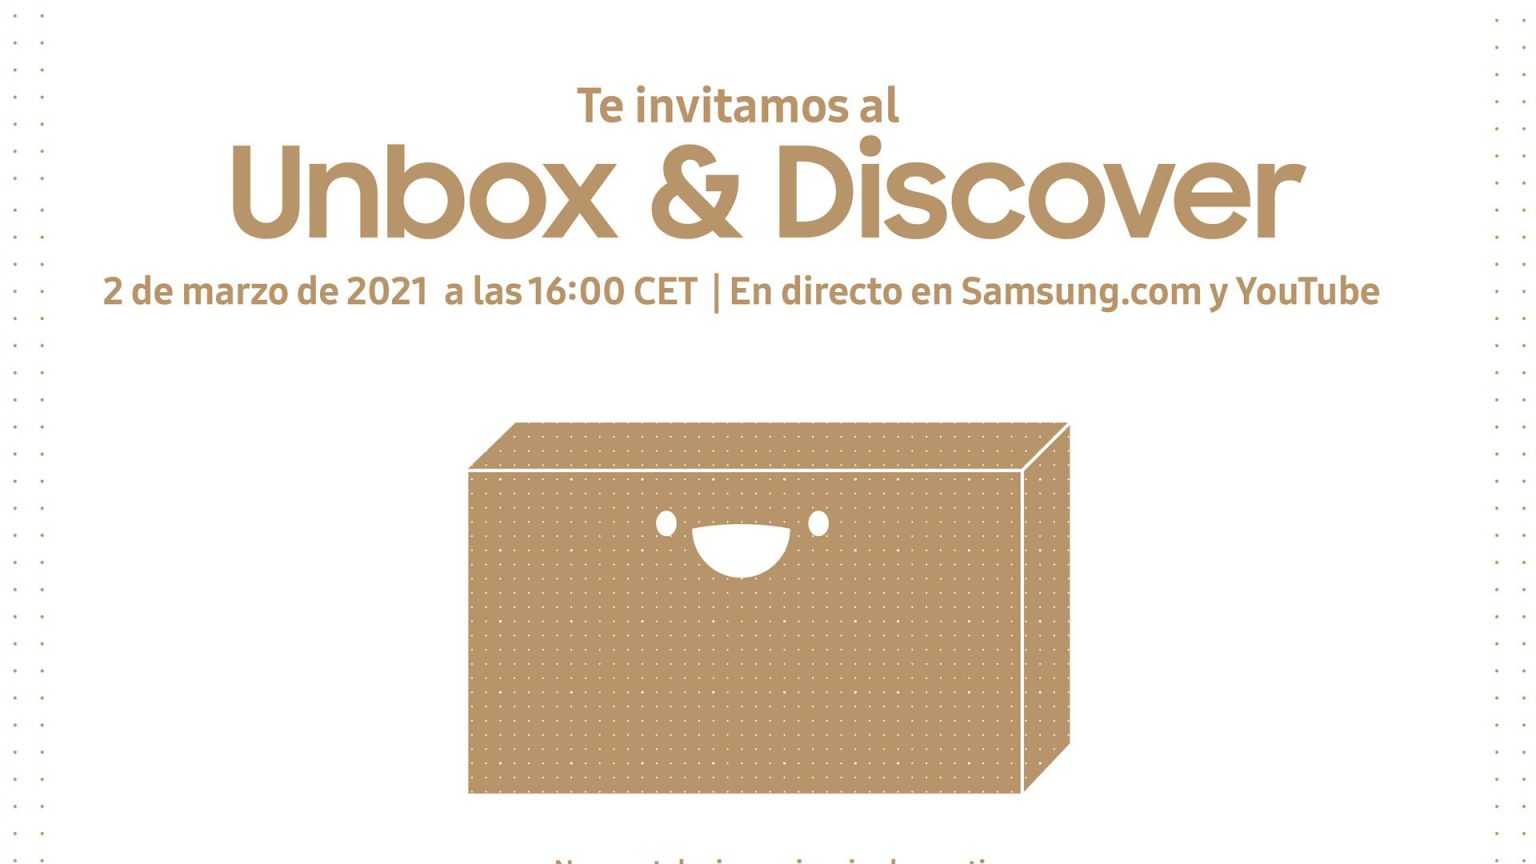 Unbox & Discover 2021